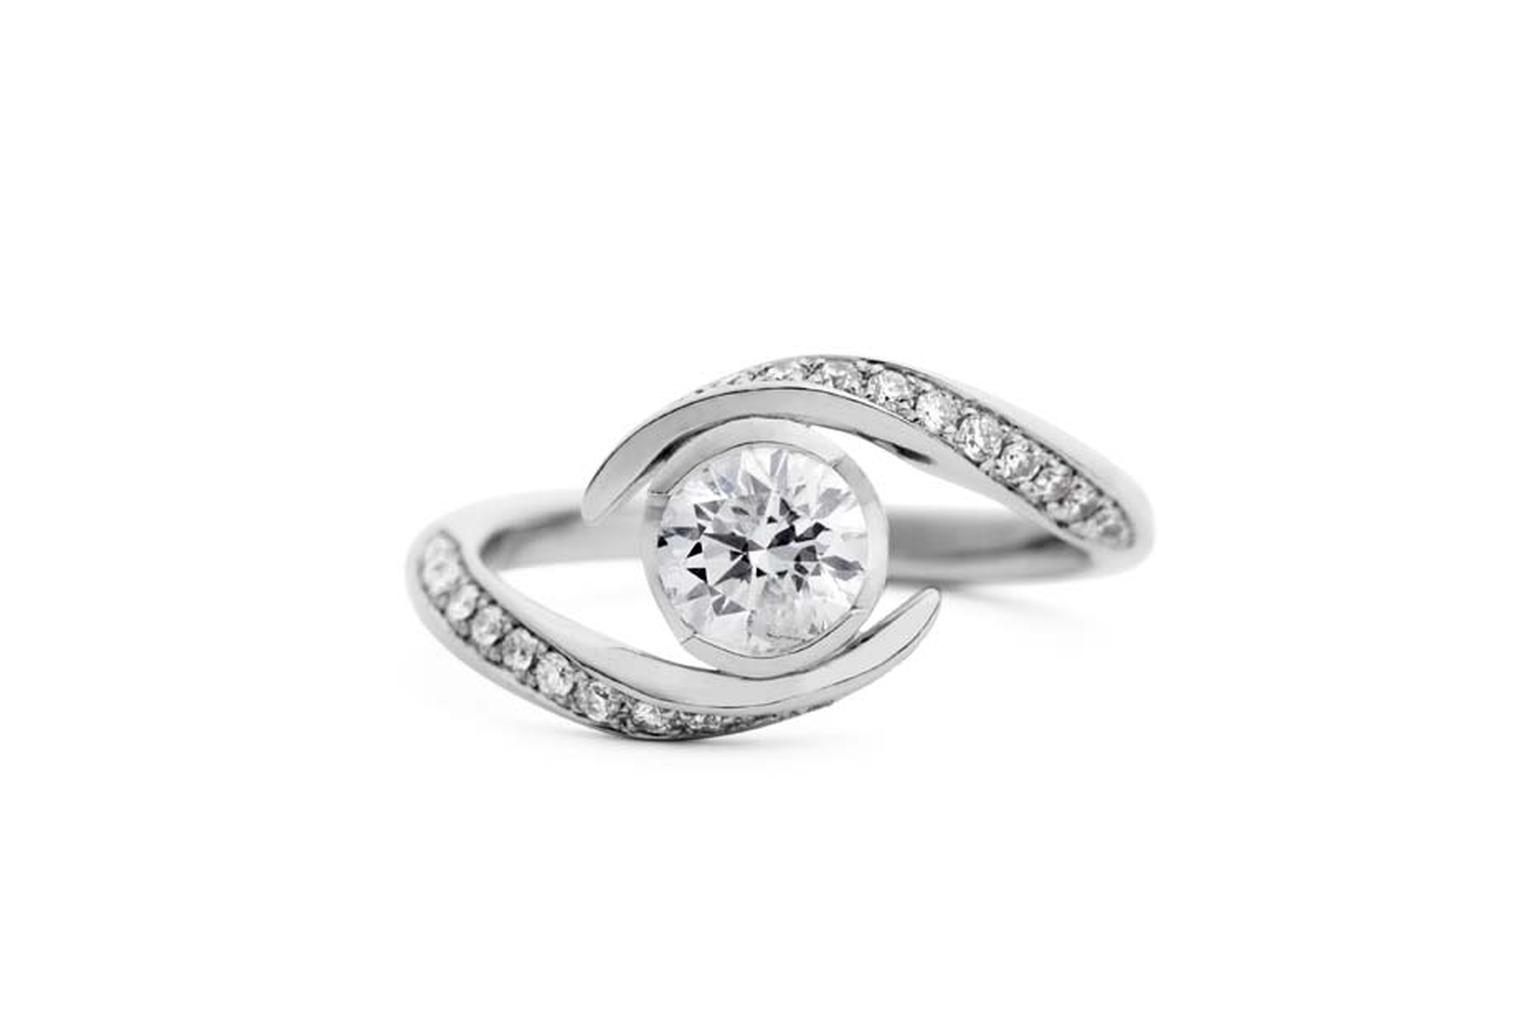 Jessica Poole Hexagon solitaire diamond engagement ring in brushed platinum with white diamonds.